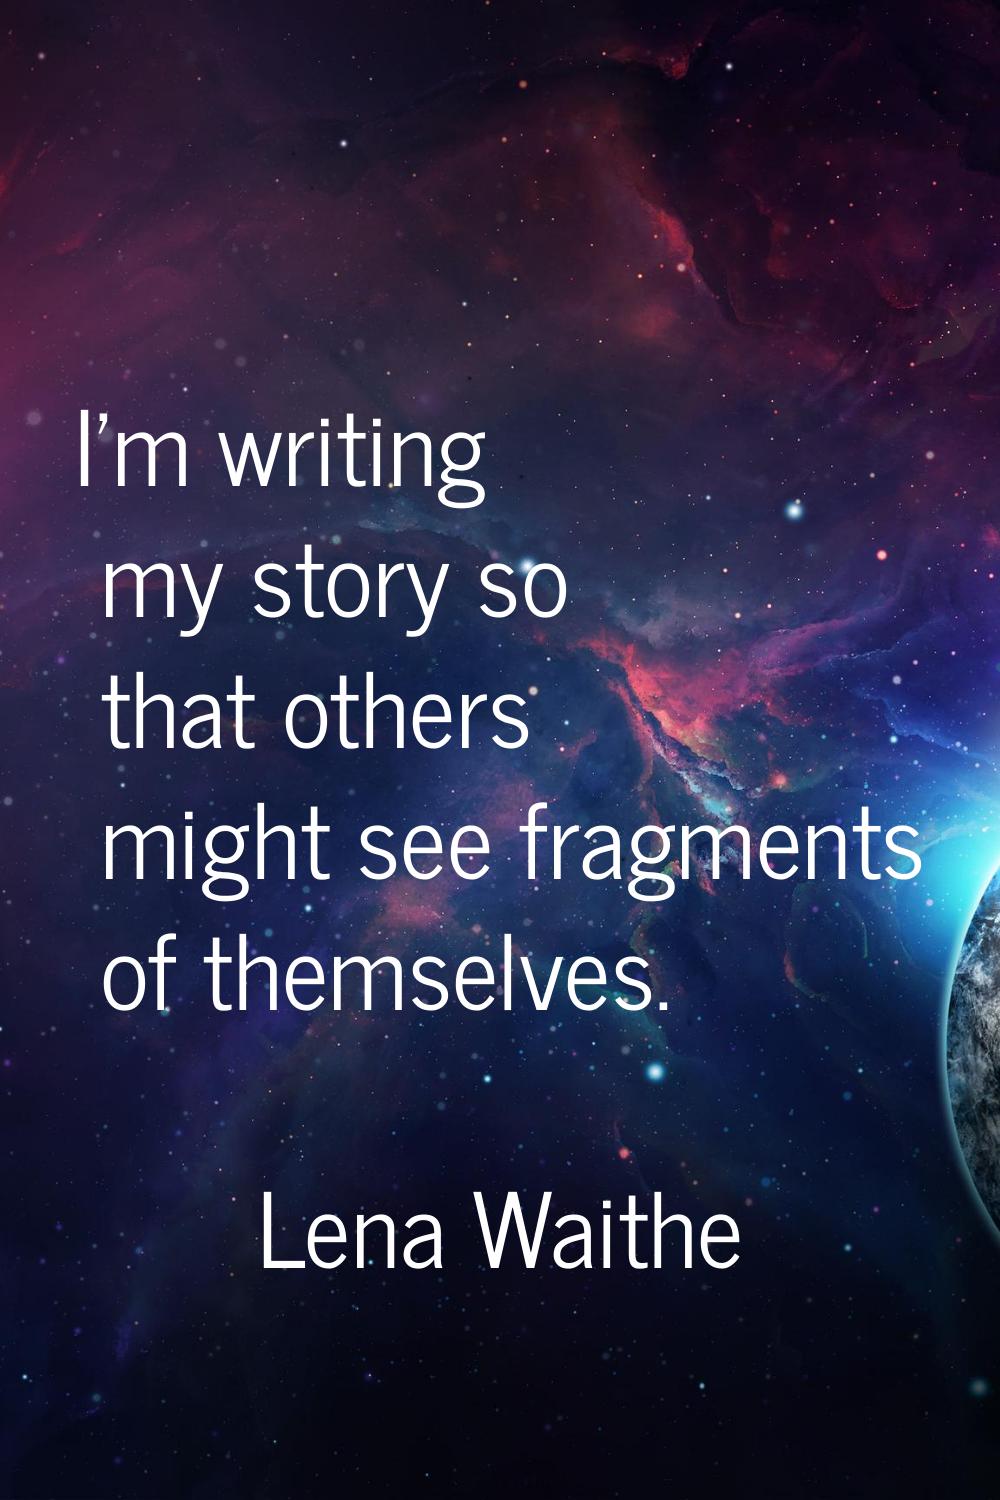 I'm writing my story so that others might see fragments of themselves.